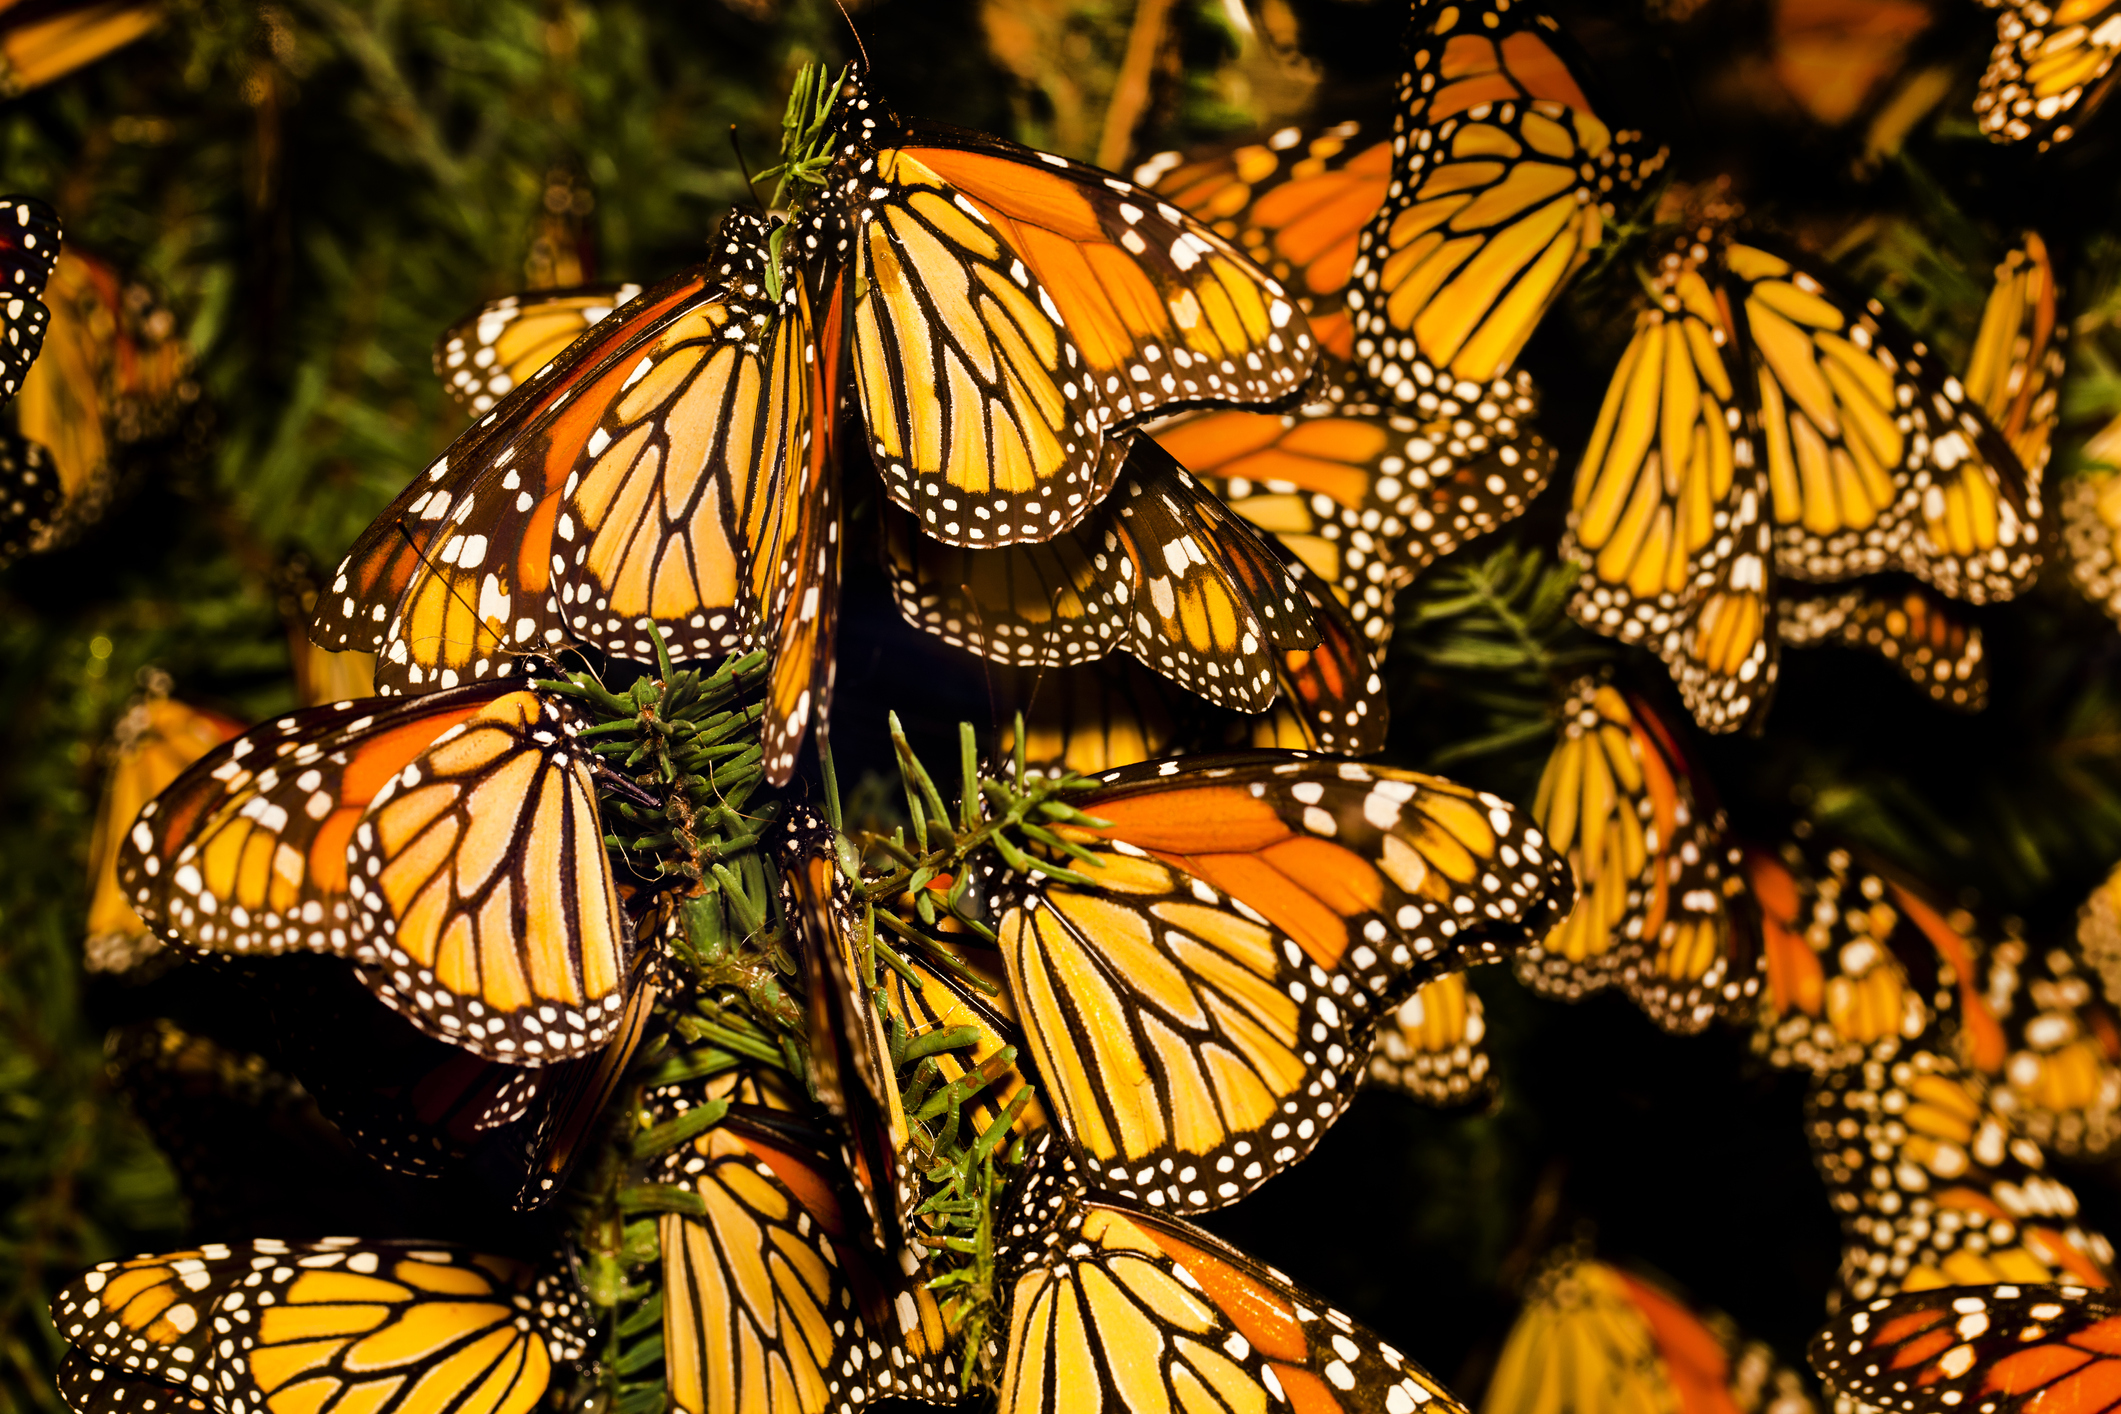 California Monarch Butterfly Count Underway – NBC Los Angeles